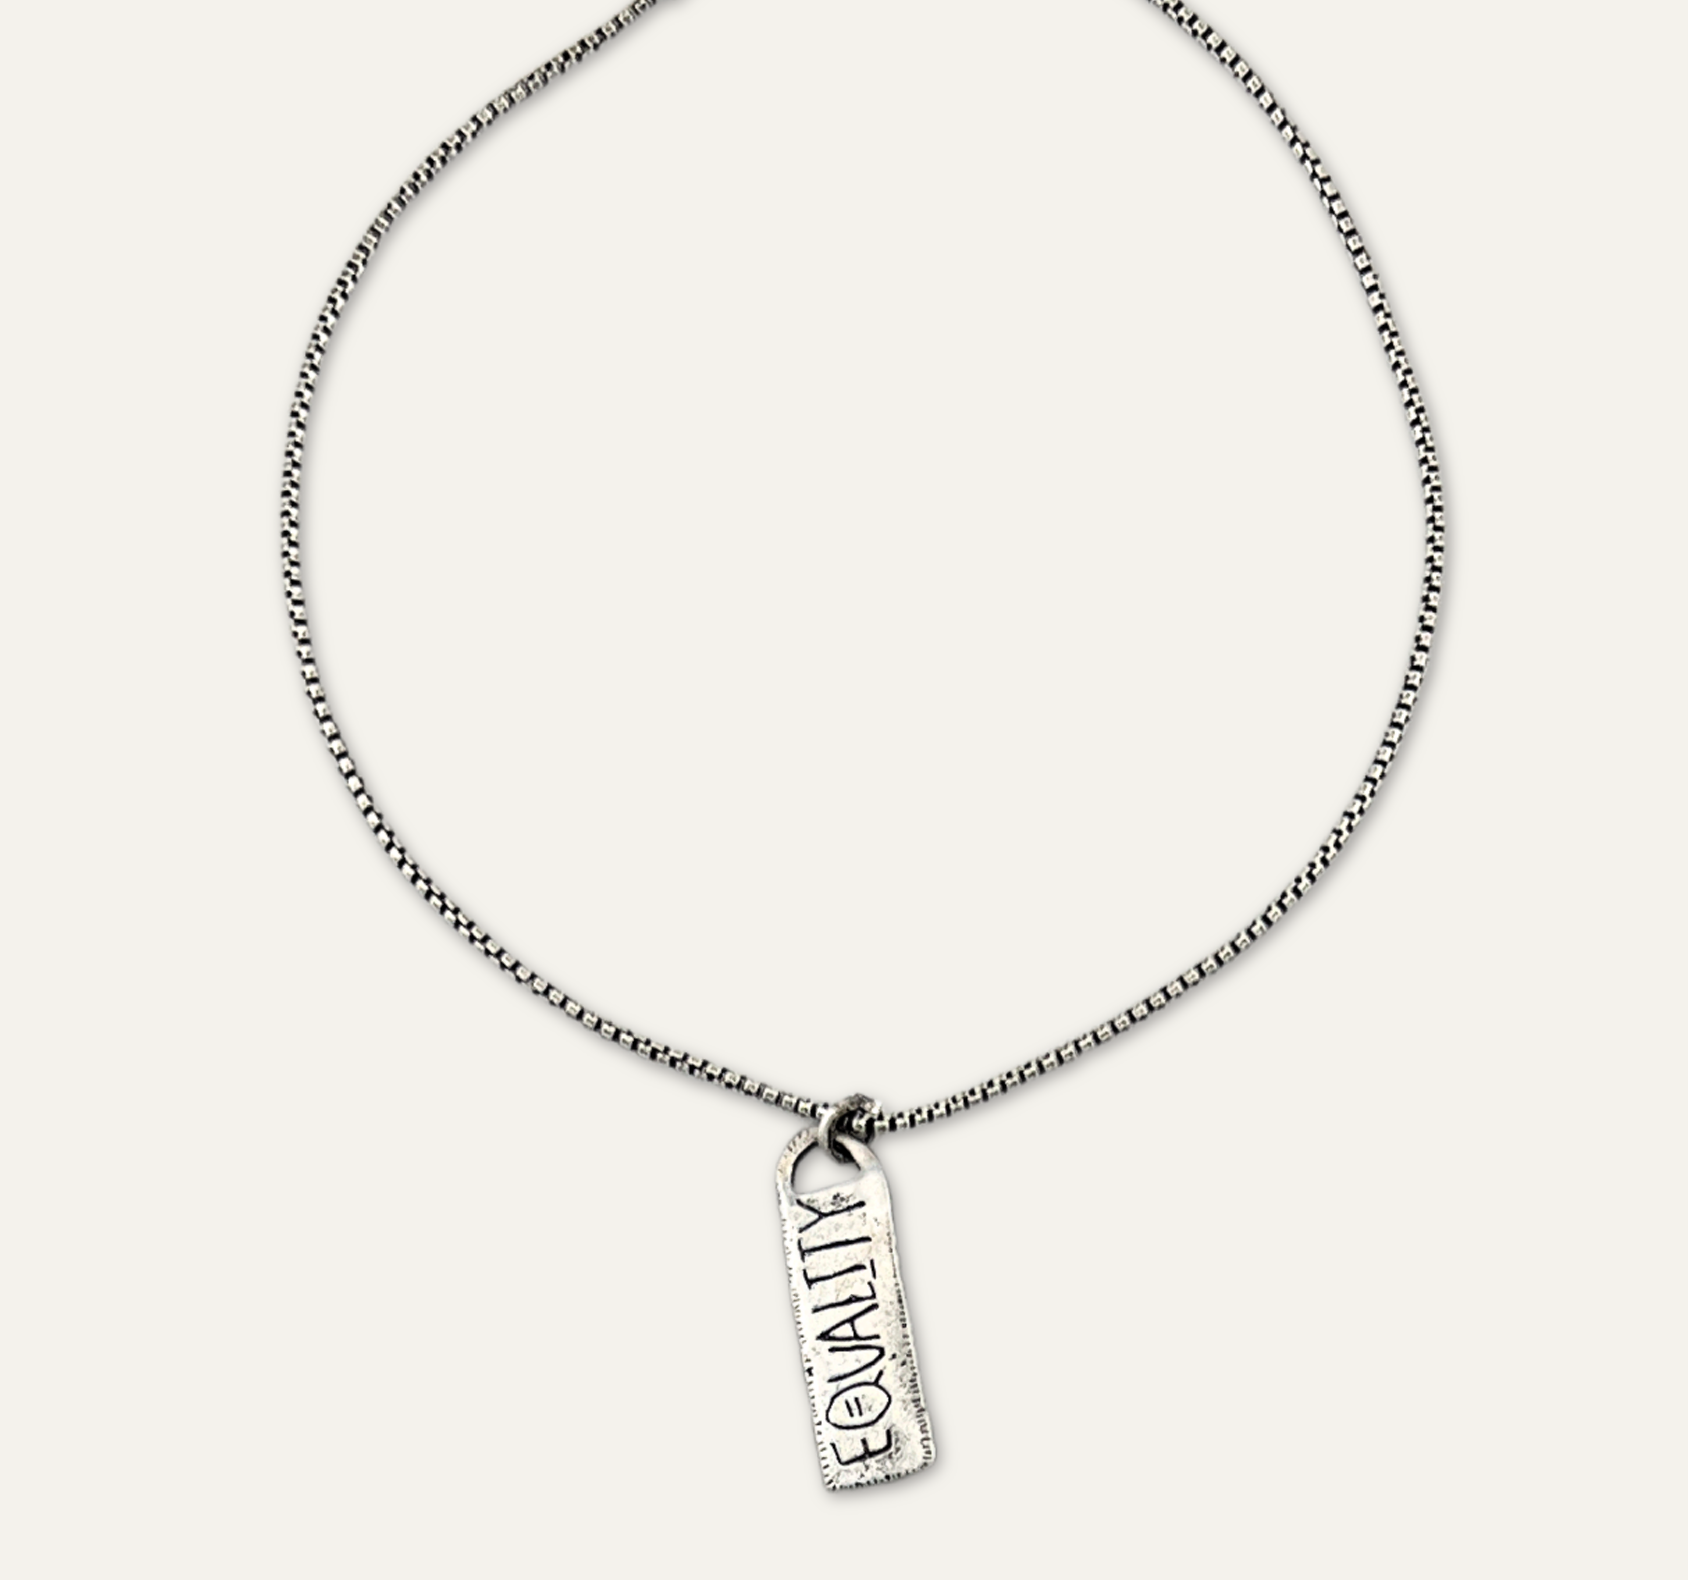 Equality Dog Tag Necklace